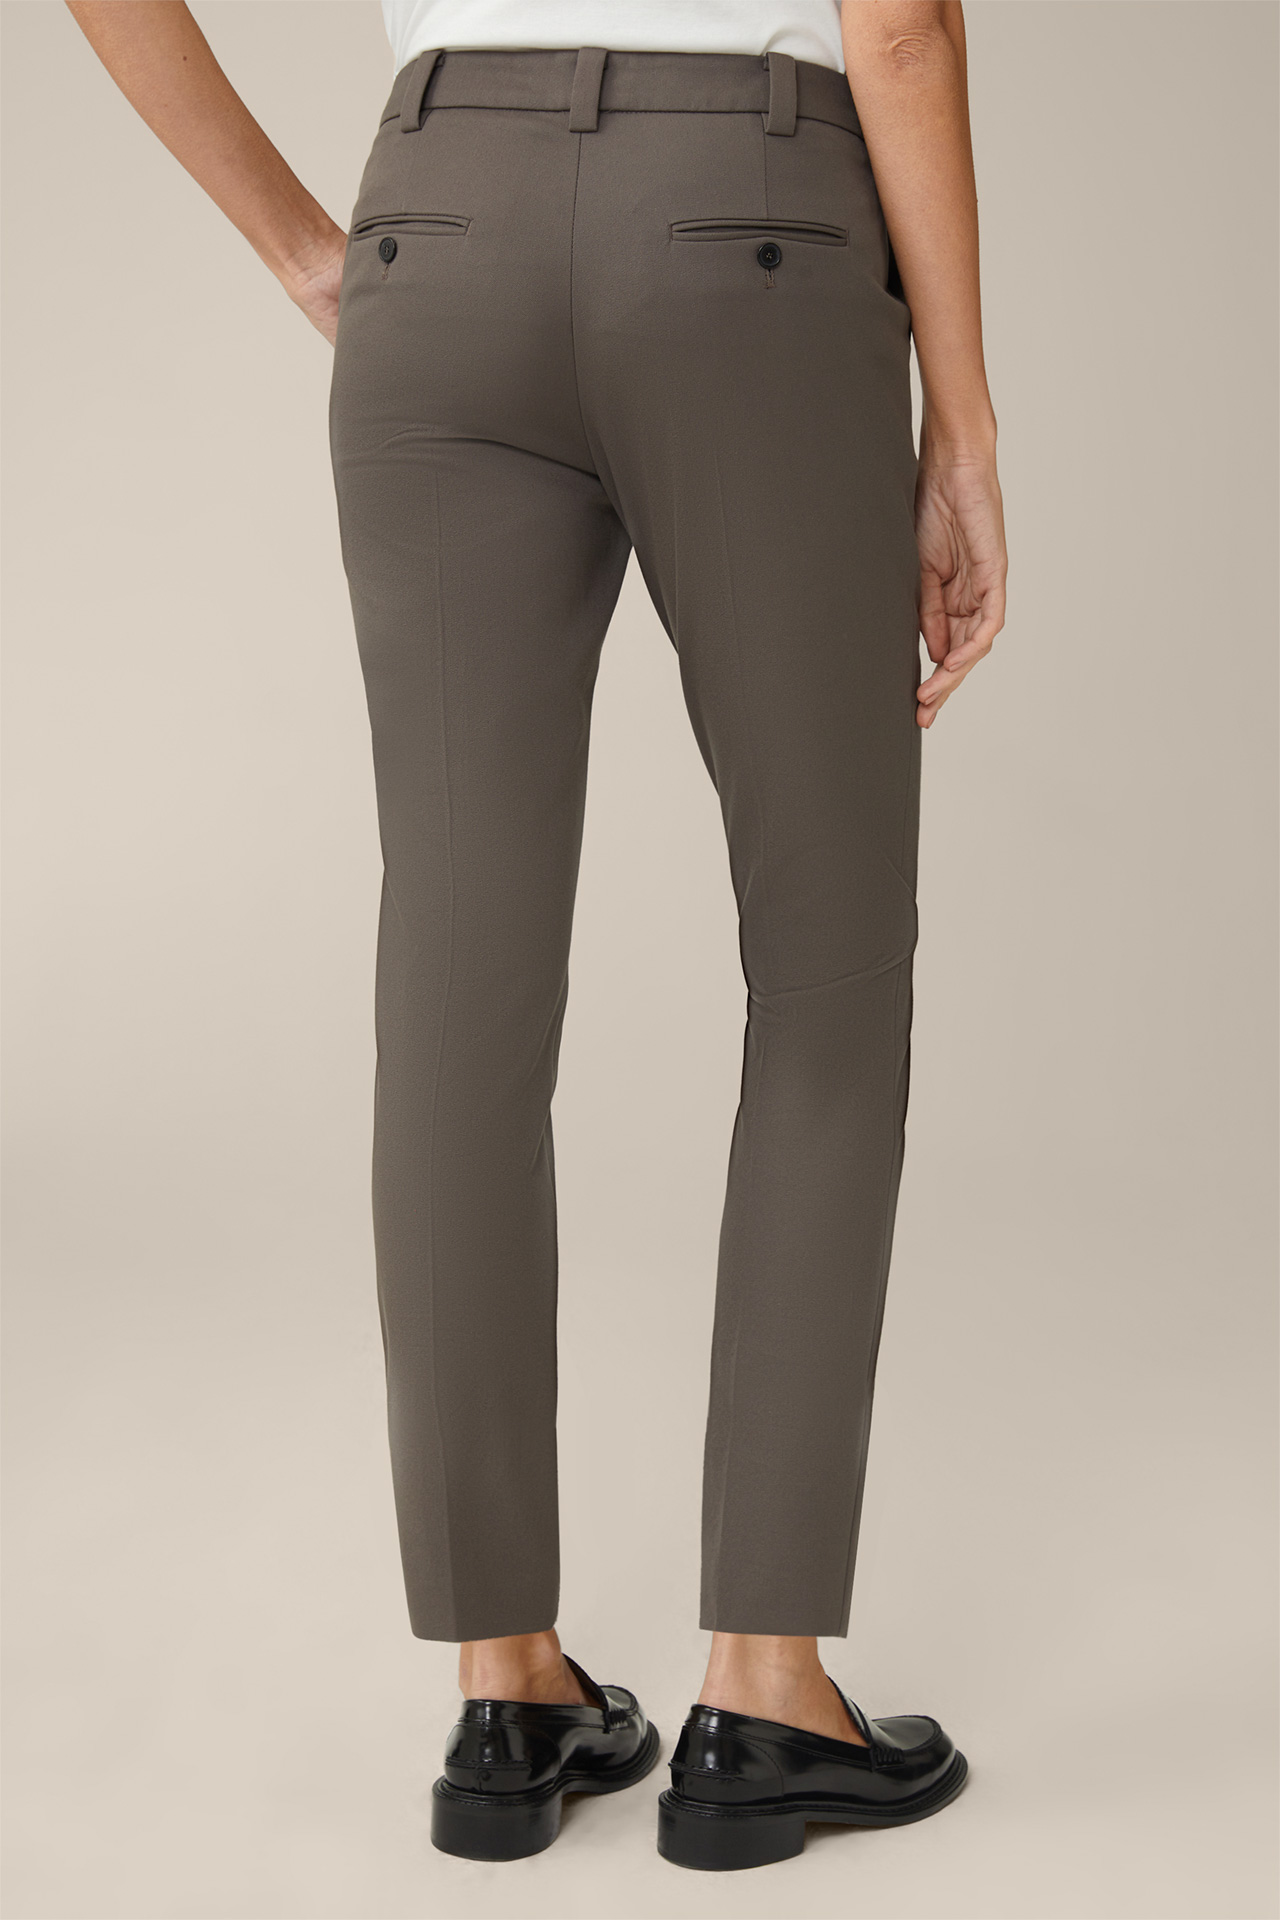 Cotton Bi-Stretch Chinos in Taupe